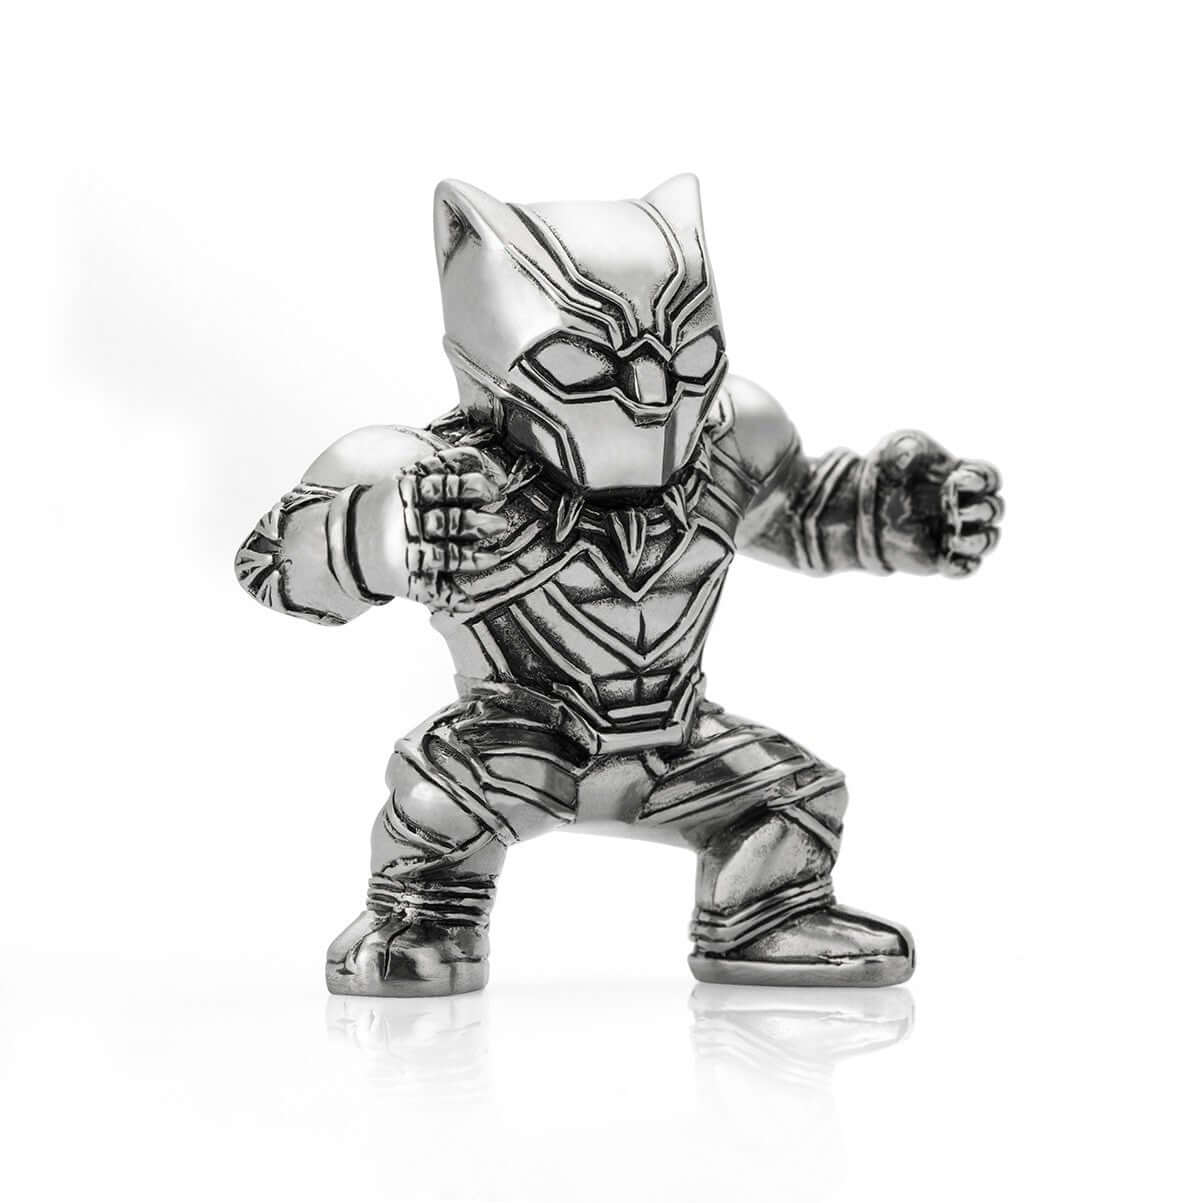 Black Panther Miniature Figurine - Marvel Collectible gift